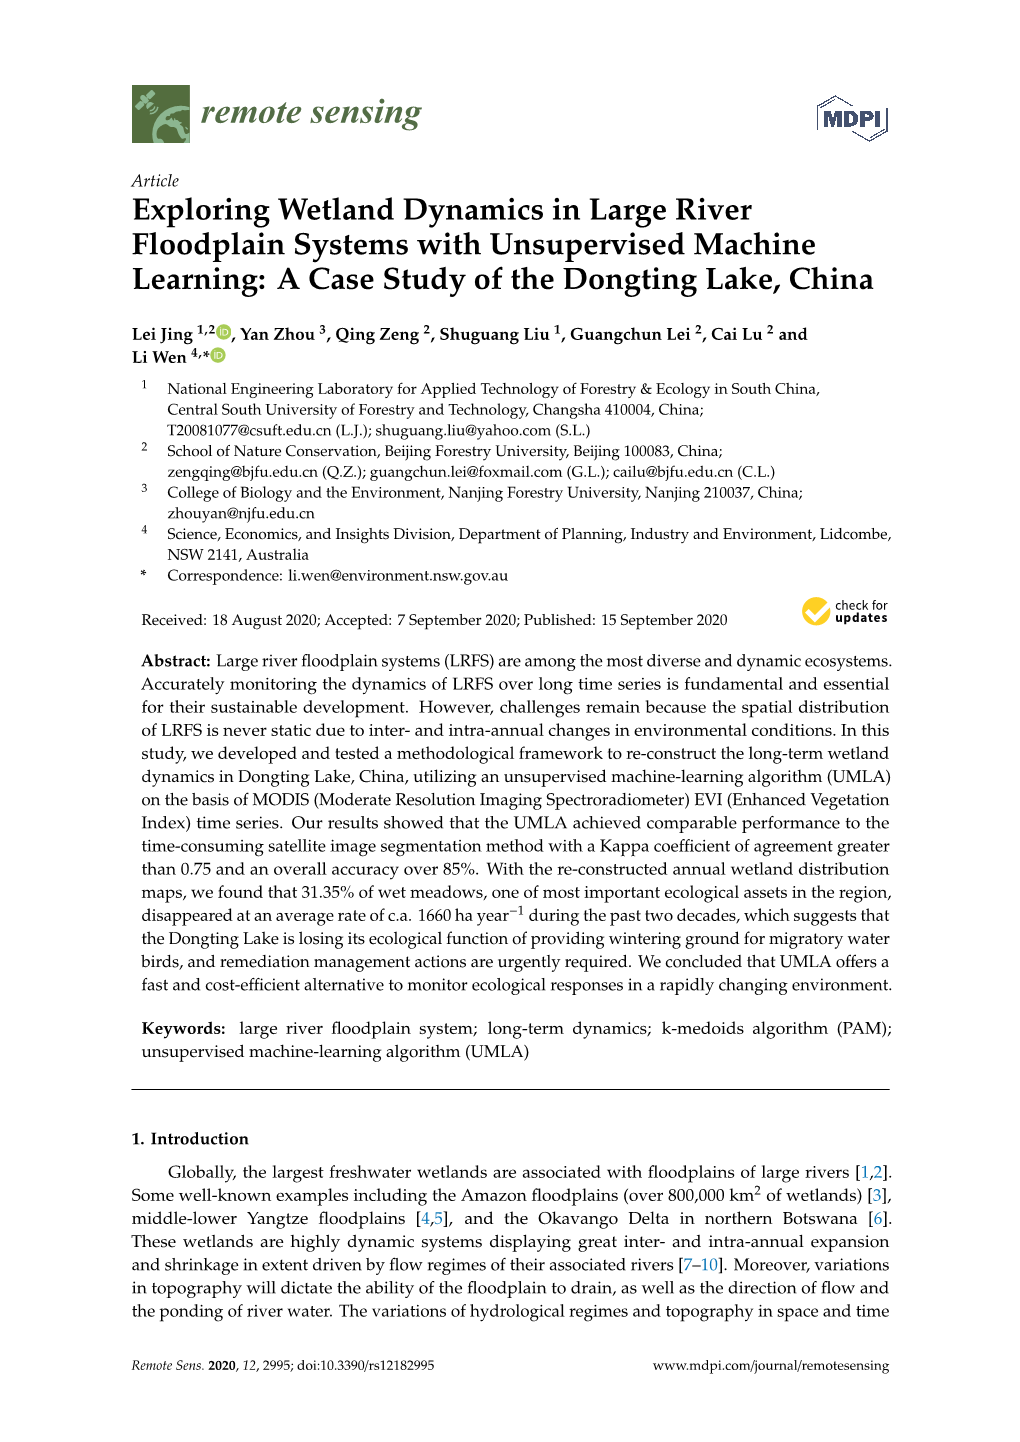 Exploring Wetland Dynamics in Large River Floodplain Systems with Unsupervised Machine Learning: a Case Study of the Dongting Lake, China